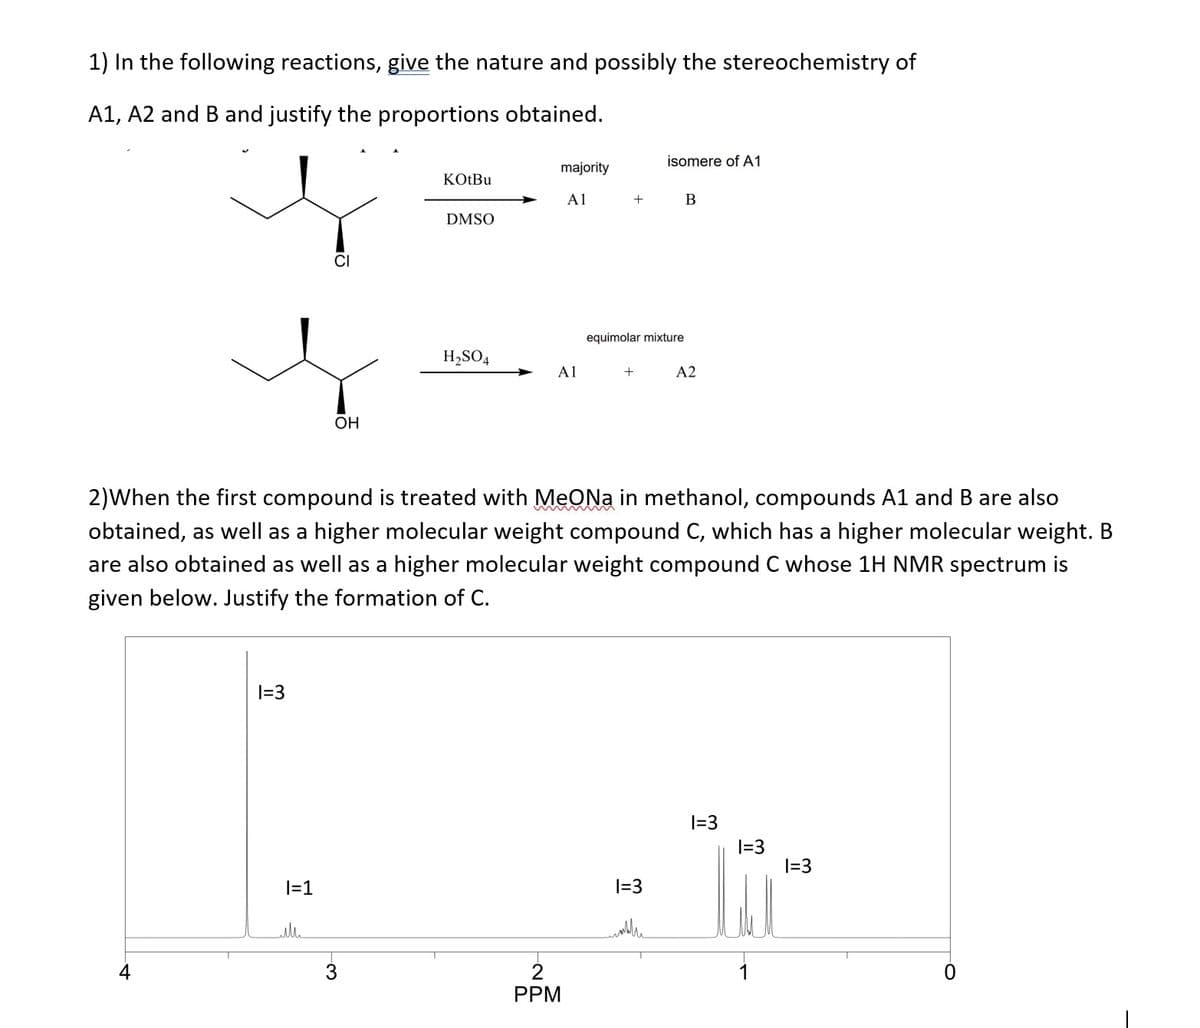 1) In the following reactions, give the nature and possibly the stereochemistry of
A1, A2 and B and justify the proportions obtained.
4
1=3
|=1
CI
ull
OH
KOtBu
3
DMSO
H₂SO4
majority
A1
A1
+
2)When the first compound is treated with MeONa in methanol, compounds A1 and B are also
obtained, as well as a higher molecular weight compound C, which has a higher molecular weight. B
are also obtained as well as a higher molecular weight compound C whose 1H NMR spectrum is
given below. Justify the formation of C.
2
PPM
equimolar mixture
+
isomere of A1
1=3
mobilie
B
A2
1=3
1=3
1
1=3
O